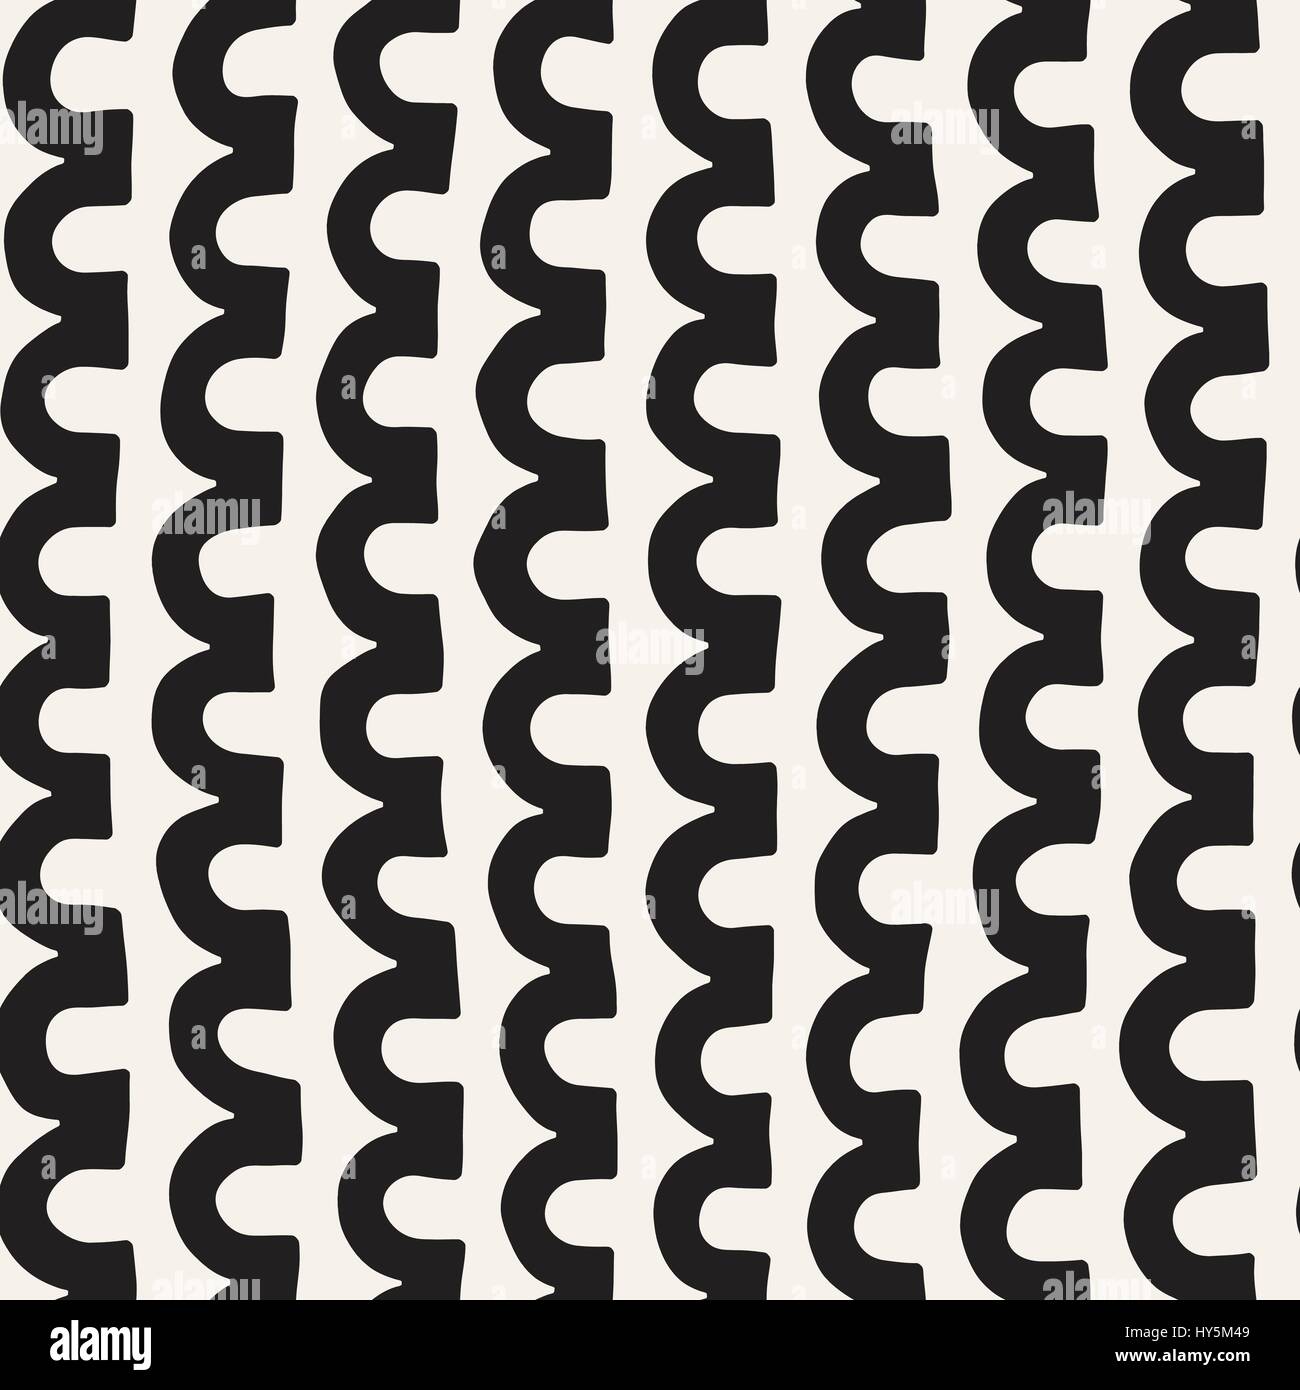 Monochrome minimalistic tribal seamless pattern with arc lines. Vector background with inky black art on white rounded stripe. Stock Vector